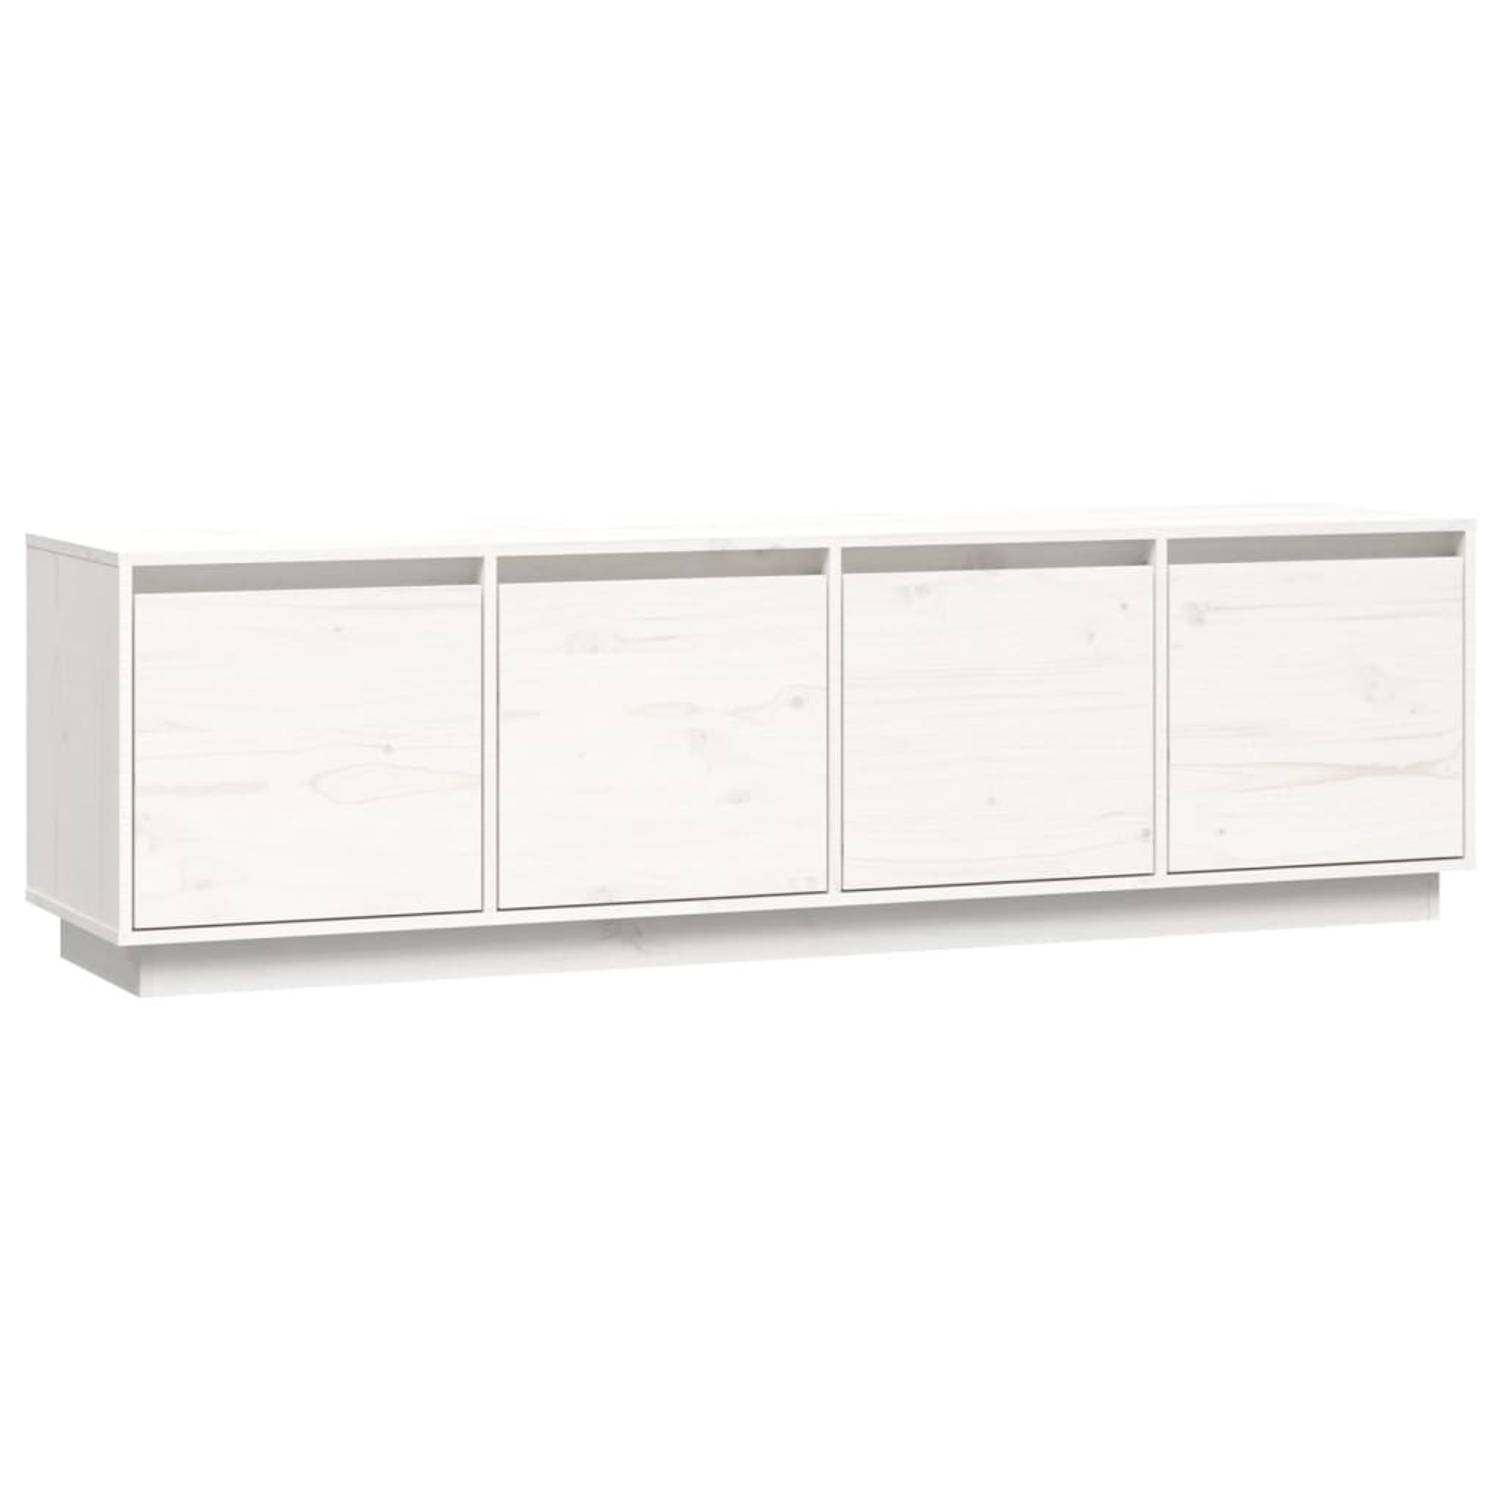 The Living Store TV-kast Massief Grenenhout - 156 x 37 x 45 cm - wit